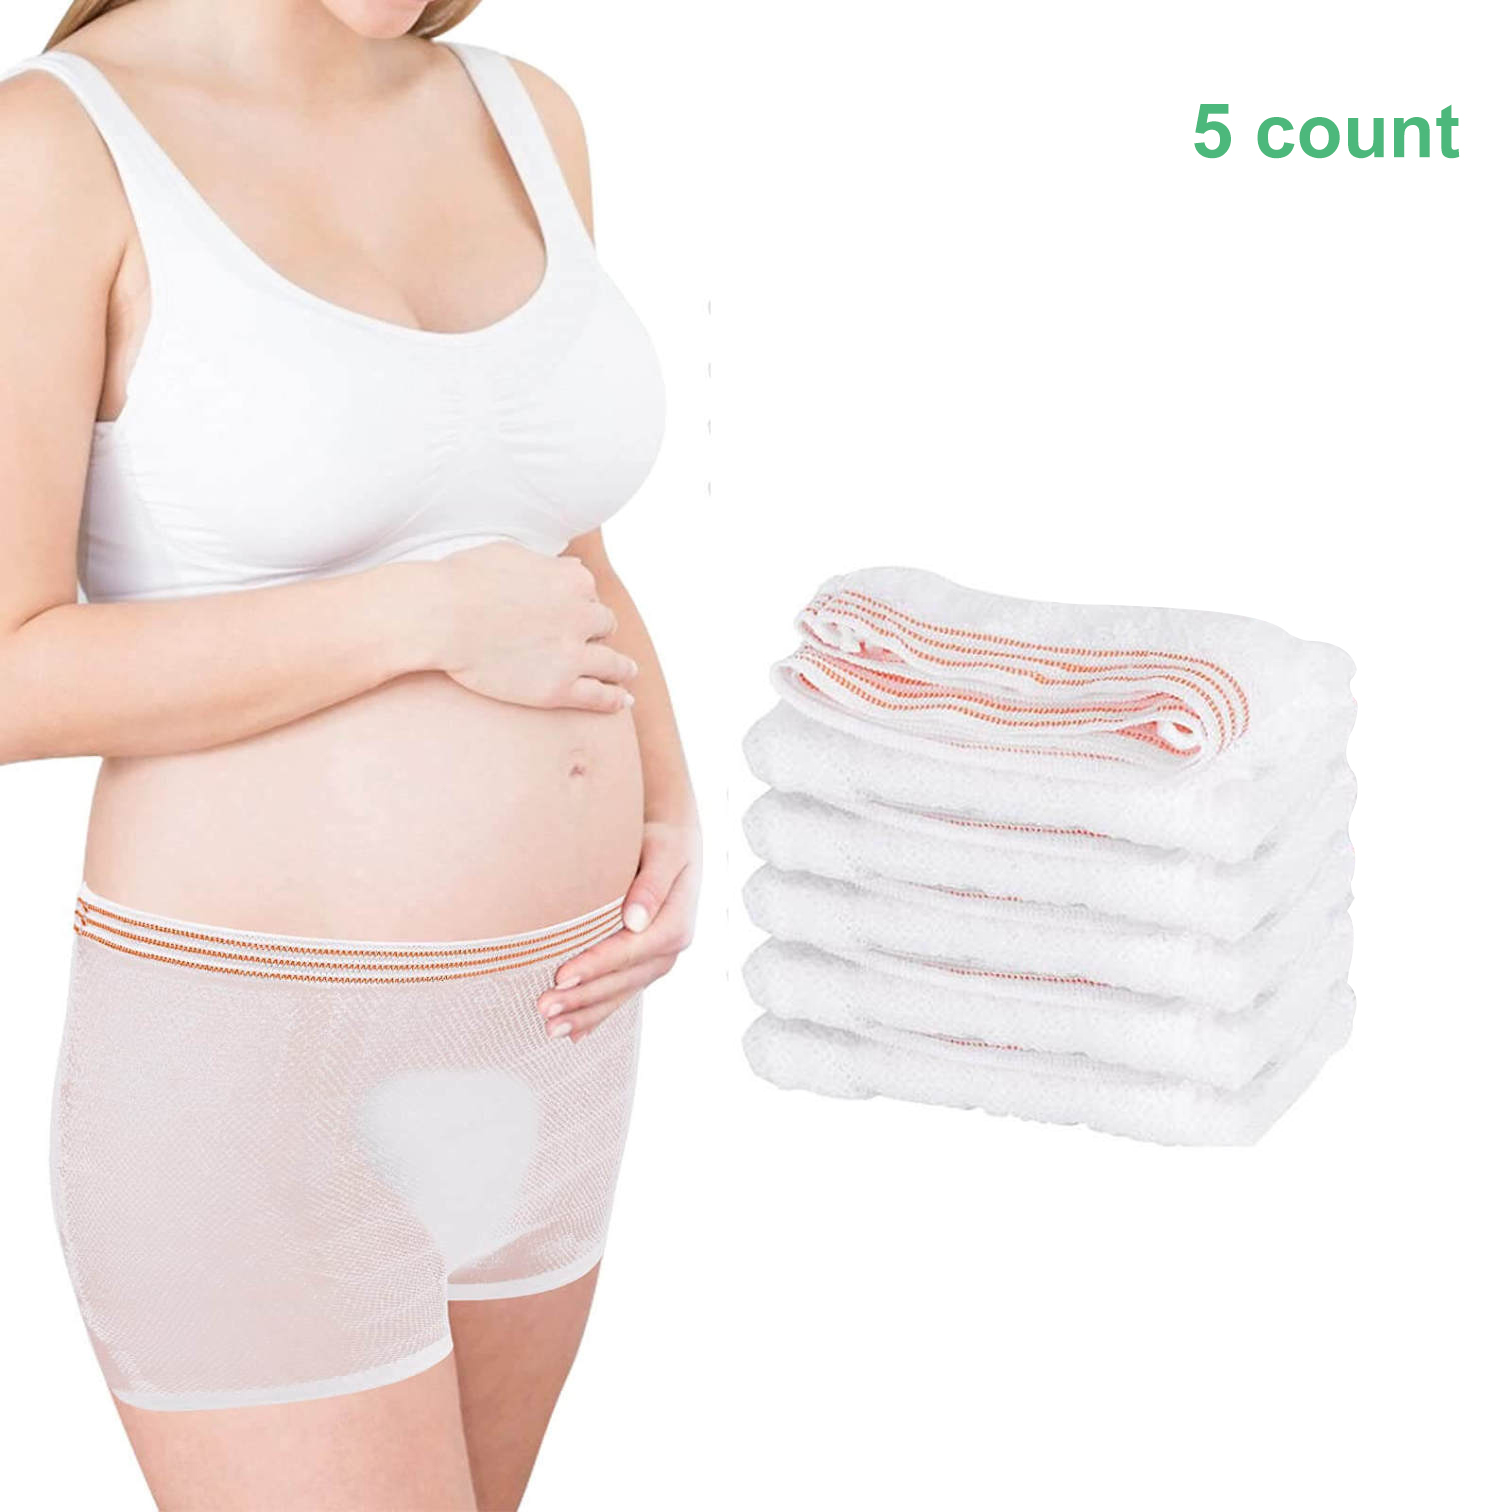 Hospital Disposable Underwear for Postpartum C-Section and Incontinence 5pcs - 2901